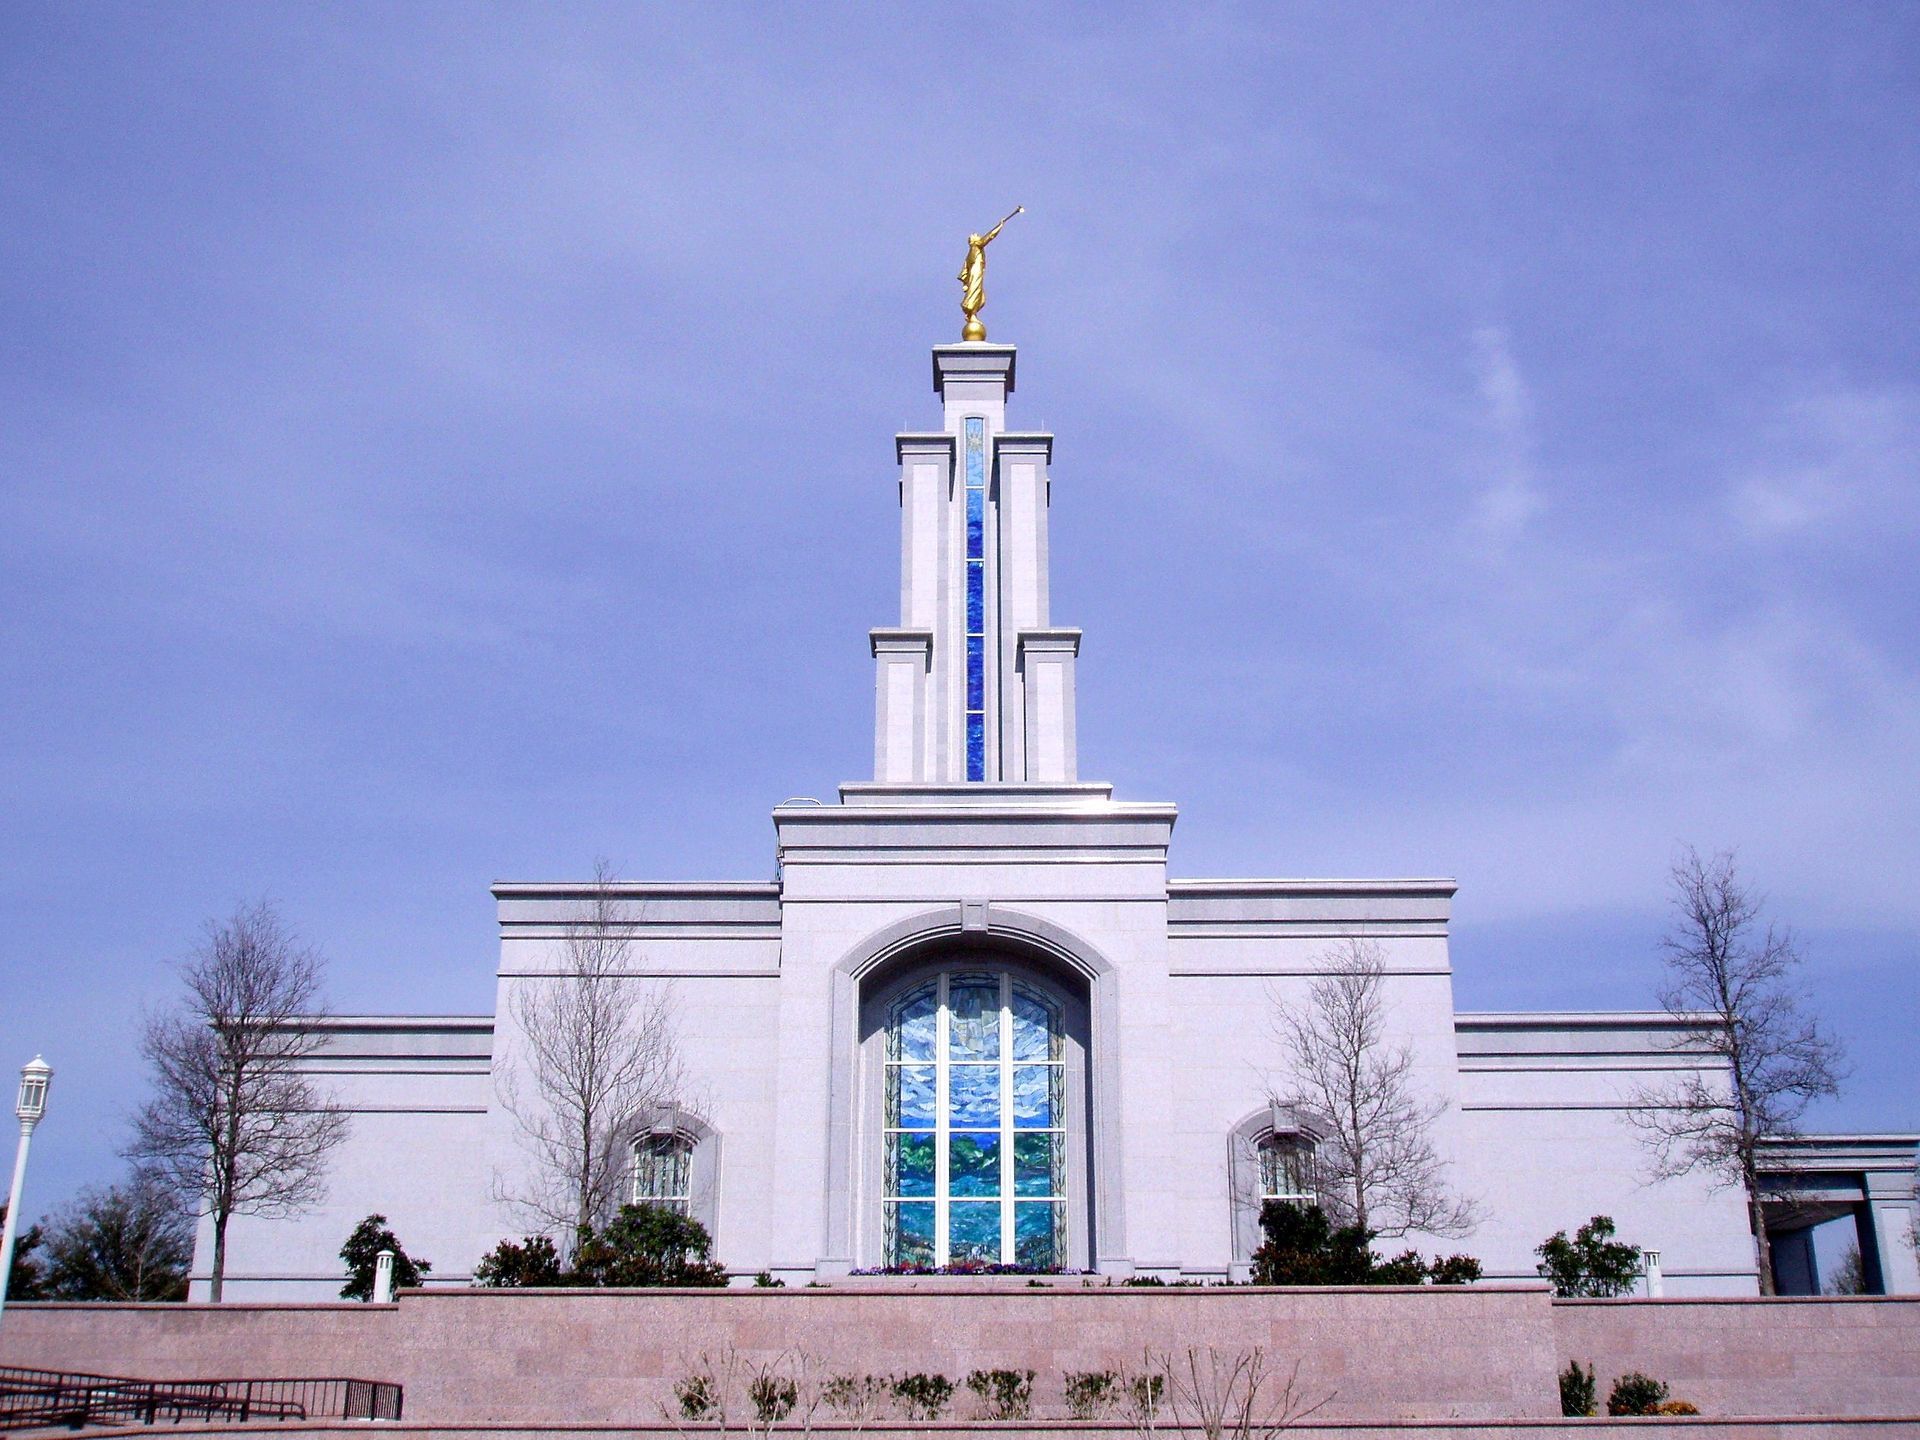 The San Antonio Texas Temple south view, including the windows and scenery.